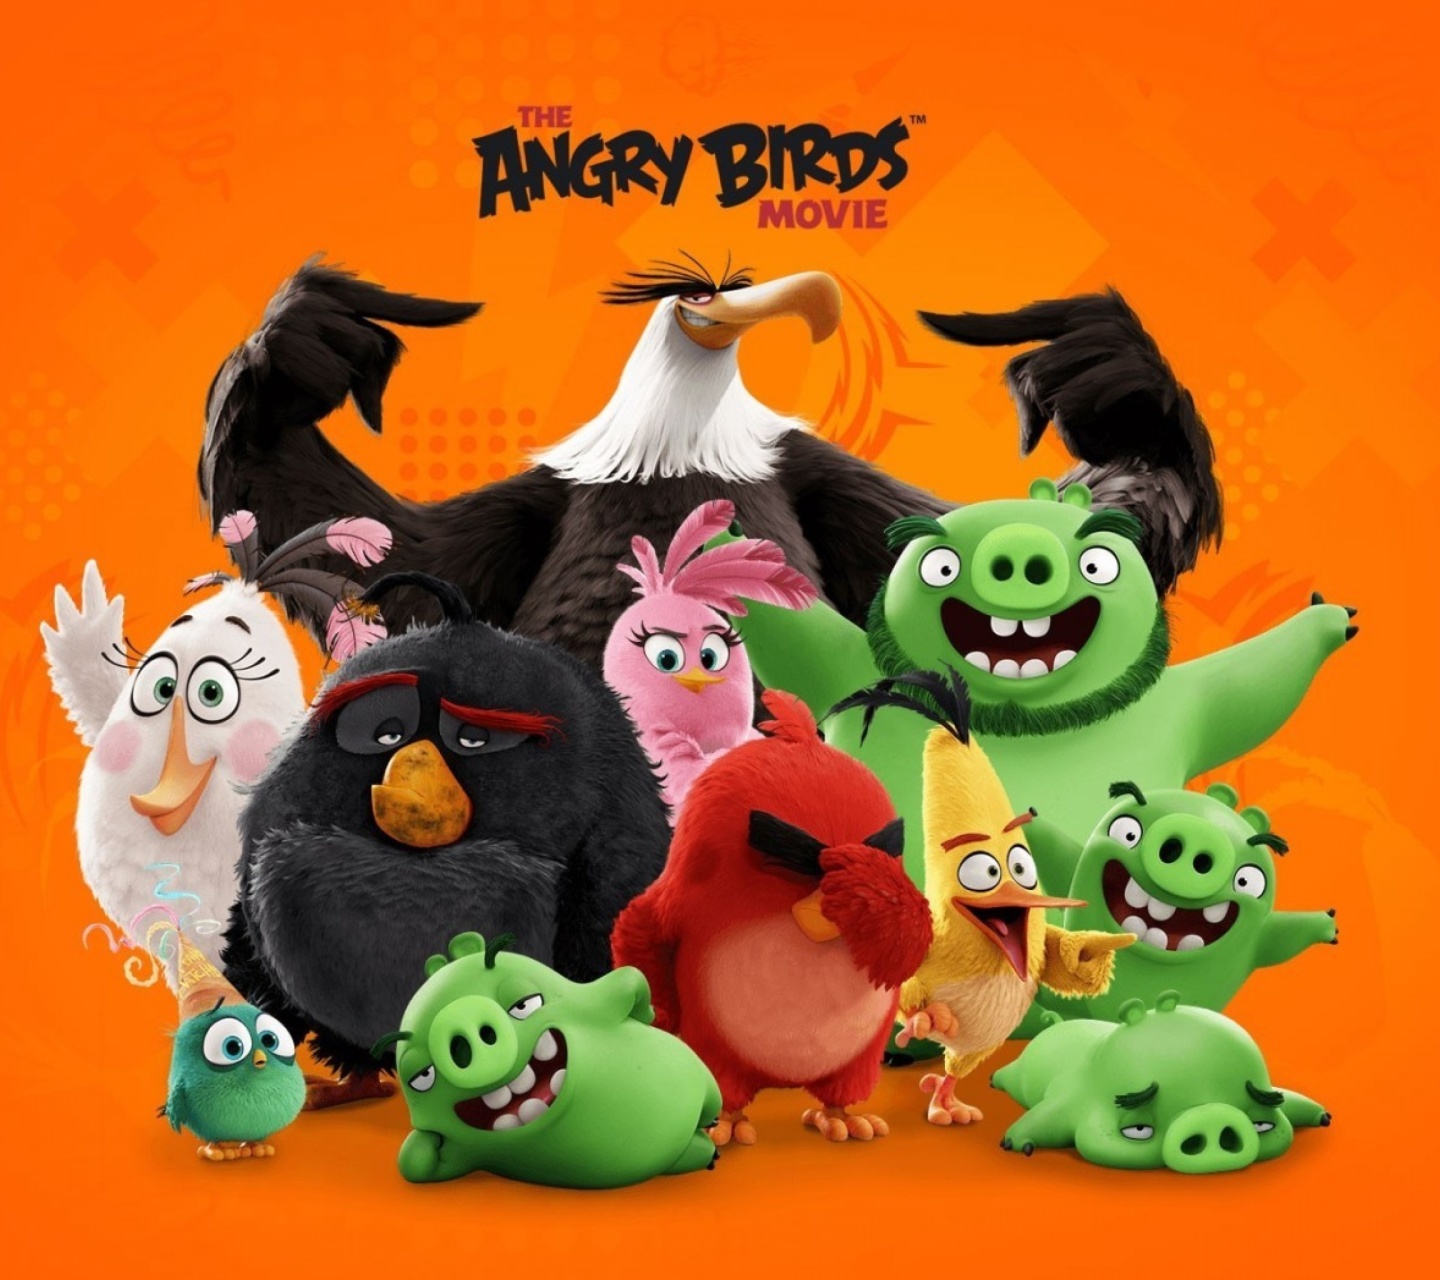 Das Angry Birds the Movie Release by Rovio Wallpaper 1440x1280